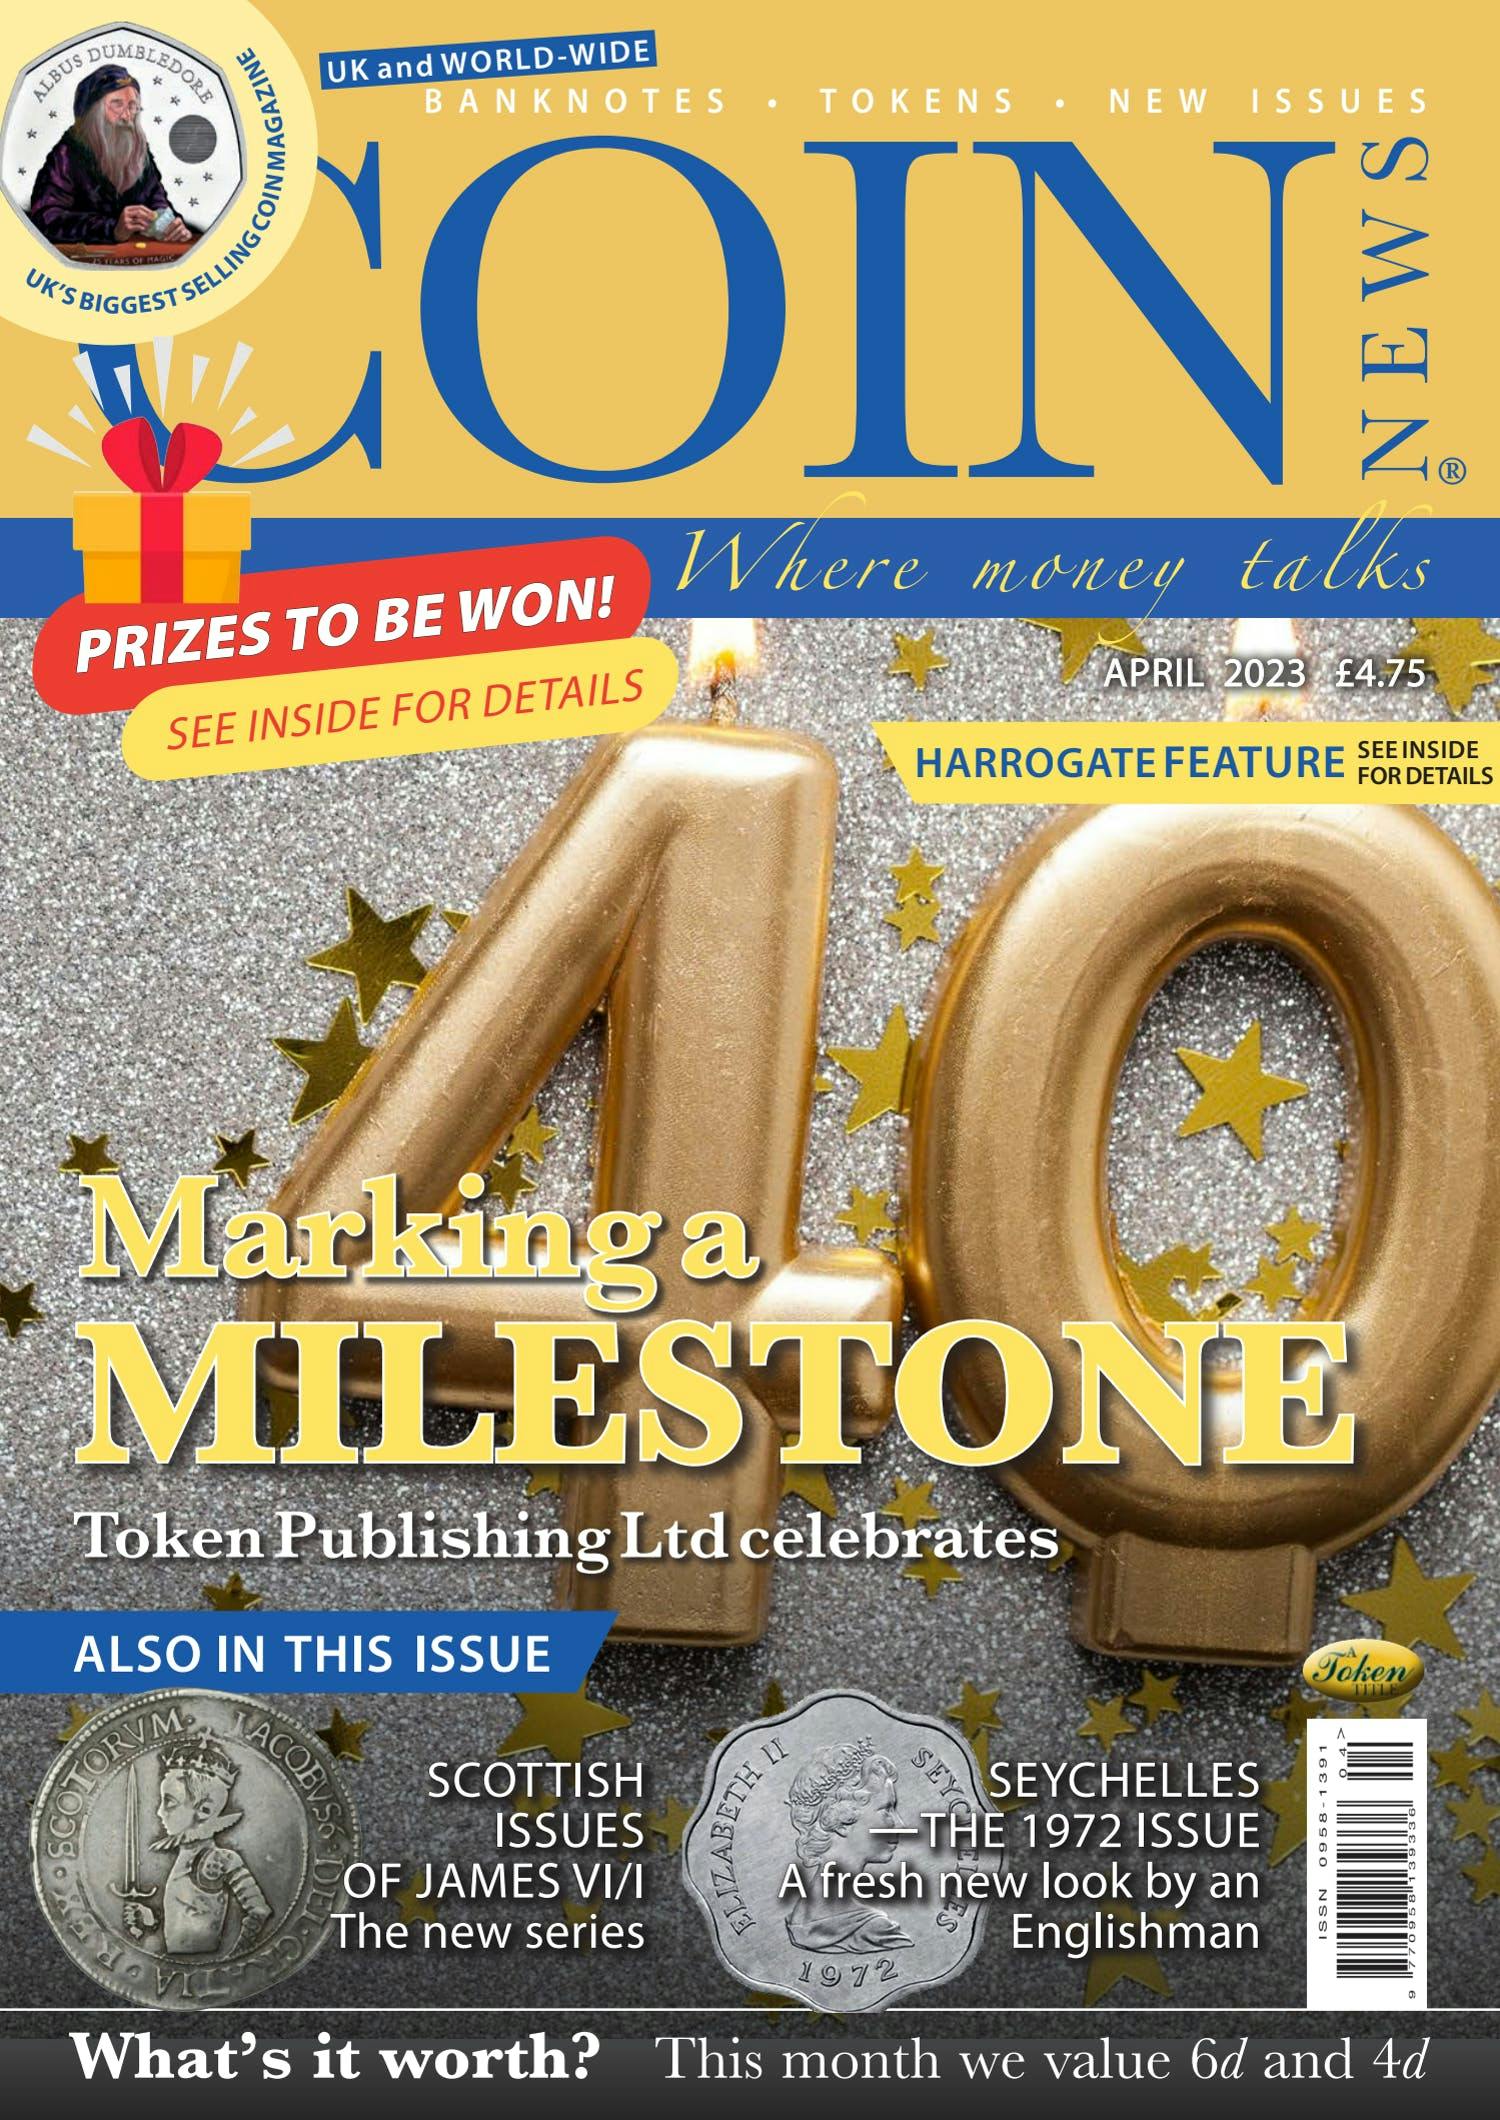 The front cover of Coin News, Volume 60, Number 4, April 2023